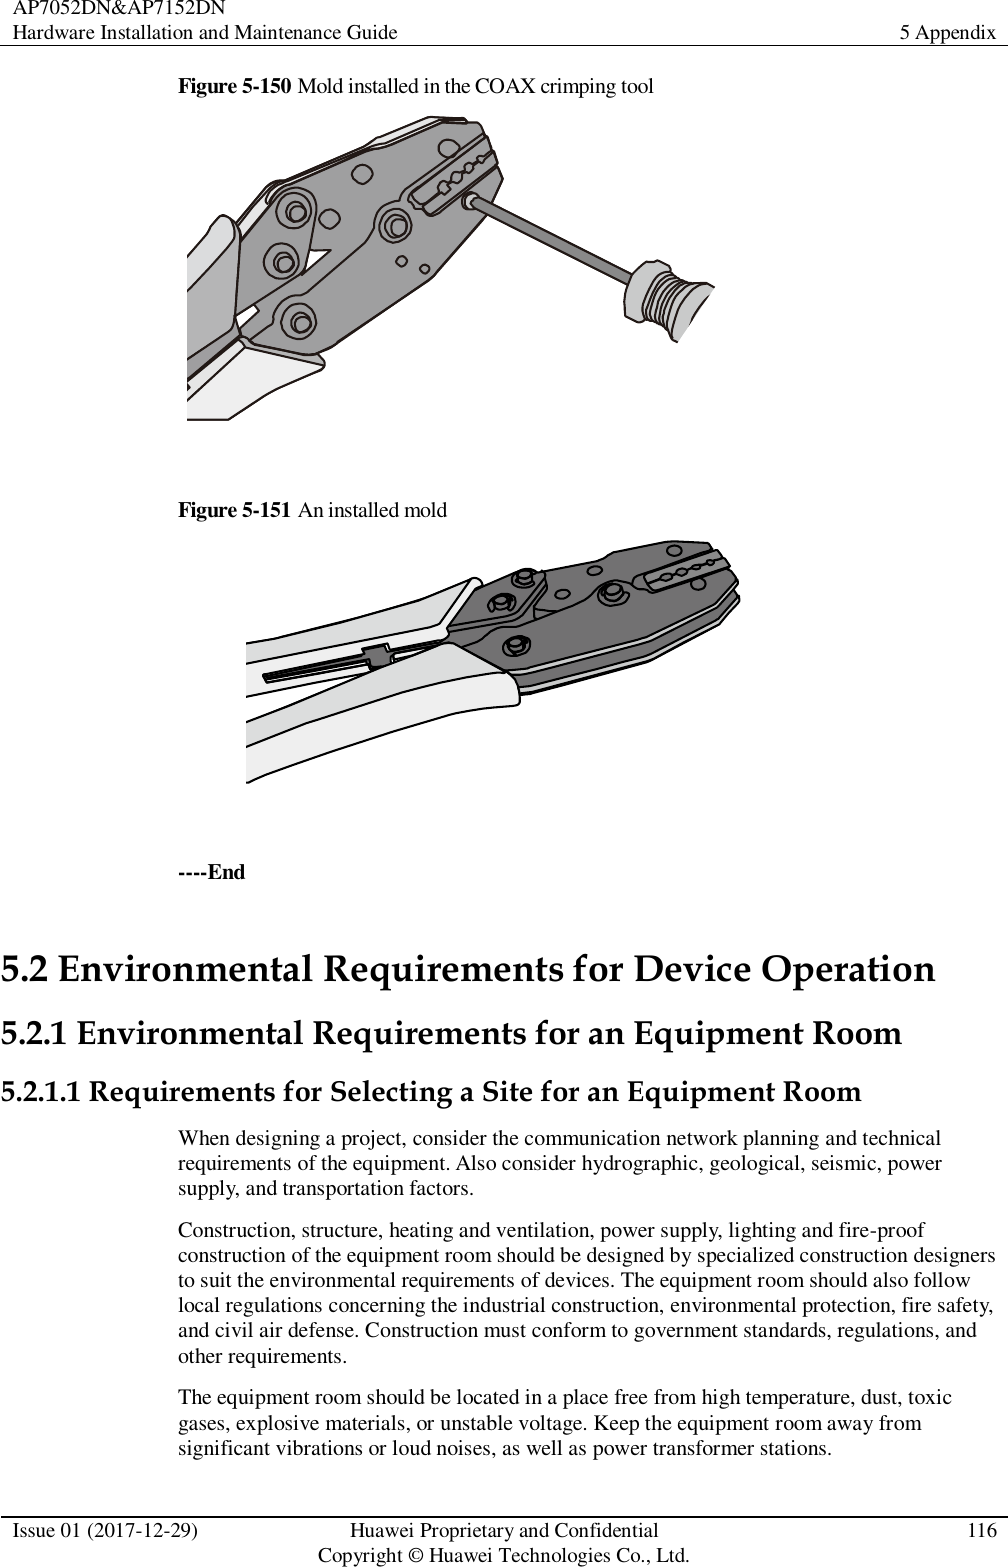 AP7052DN&amp;AP7152DN Hardware Installation and Maintenance Guide 5 Appendix  Issue 01 (2017-12-29) Huawei Proprietary and Confidential                                     Copyright © Huawei Technologies Co., Ltd. 116  Figure 5-150 Mold installed in the COAX crimping tool   Figure 5-151 An installed mold   ----End 5.2 Environmental Requirements for Device Operation 5.2.1 Environmental Requirements for an Equipment Room 5.2.1.1 Requirements for Selecting a Site for an Equipment Room When designing a project, consider the communication network planning and technical requirements of the equipment. Also consider hydrographic, geological, seismic, power supply, and transportation factors. Construction, structure, heating and ventilation, power supply, lighting and fire-proof construction of the equipment room should be designed by specialized construction designers to suit the environmental requirements of devices. The equipment room should also follow local regulations concerning the industrial construction, environmental protection, fire safety, and civil air defense. Construction must conform to government standards, regulations, and other requirements. The equipment room should be located in a place free from high temperature, dust, toxic gases, explosive materials, or unstable voltage. Keep the equipment room away from significant vibrations or loud noises, as well as power transformer stations. 